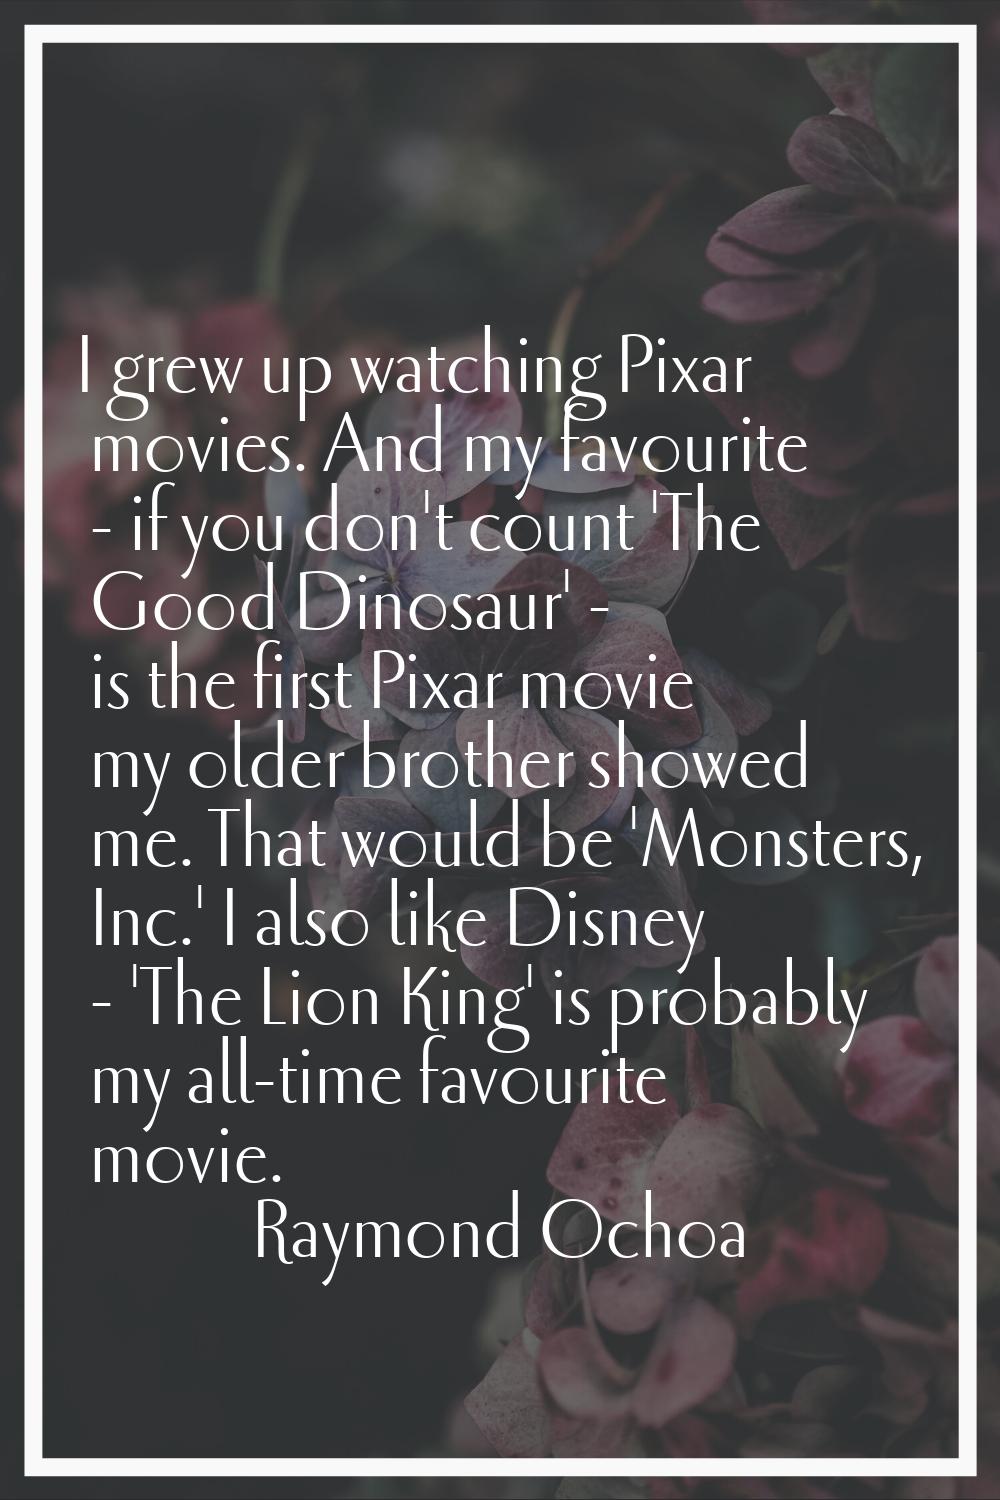 I grew up watching Pixar movies. And my favourite - if you don't count 'The Good Dinosaur' - is the